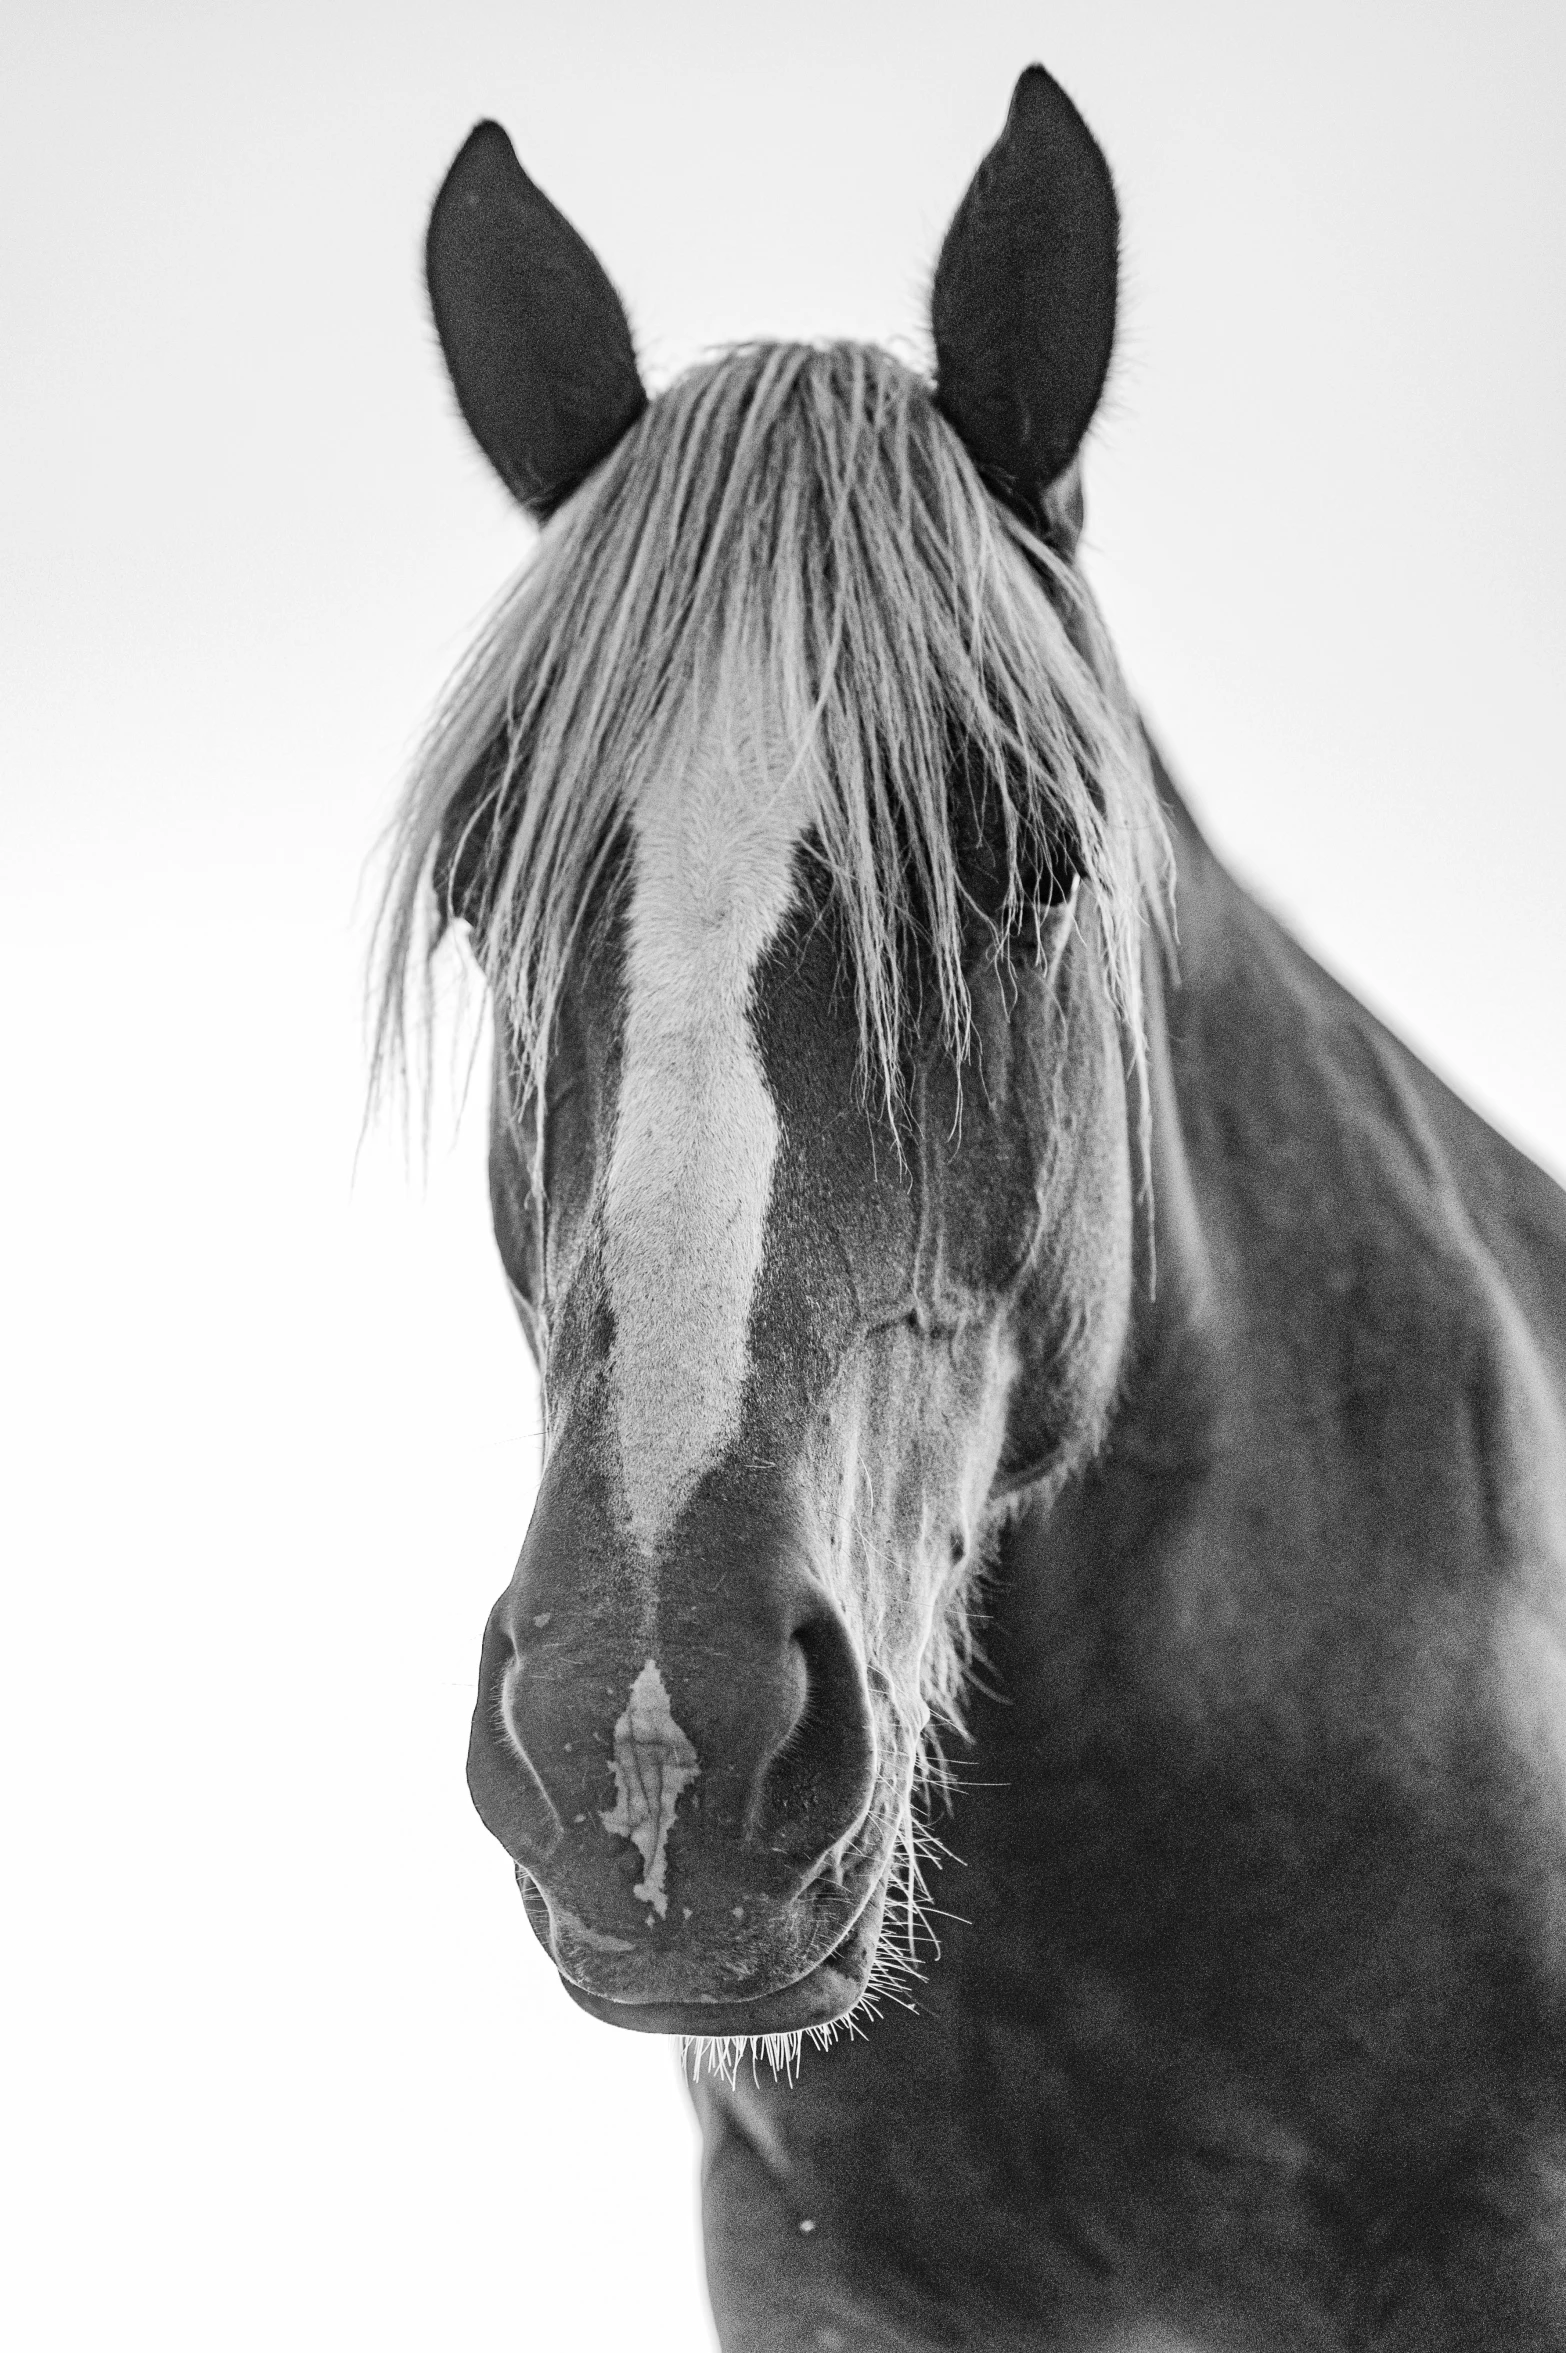 an image of a horse with hair blowing in the wind